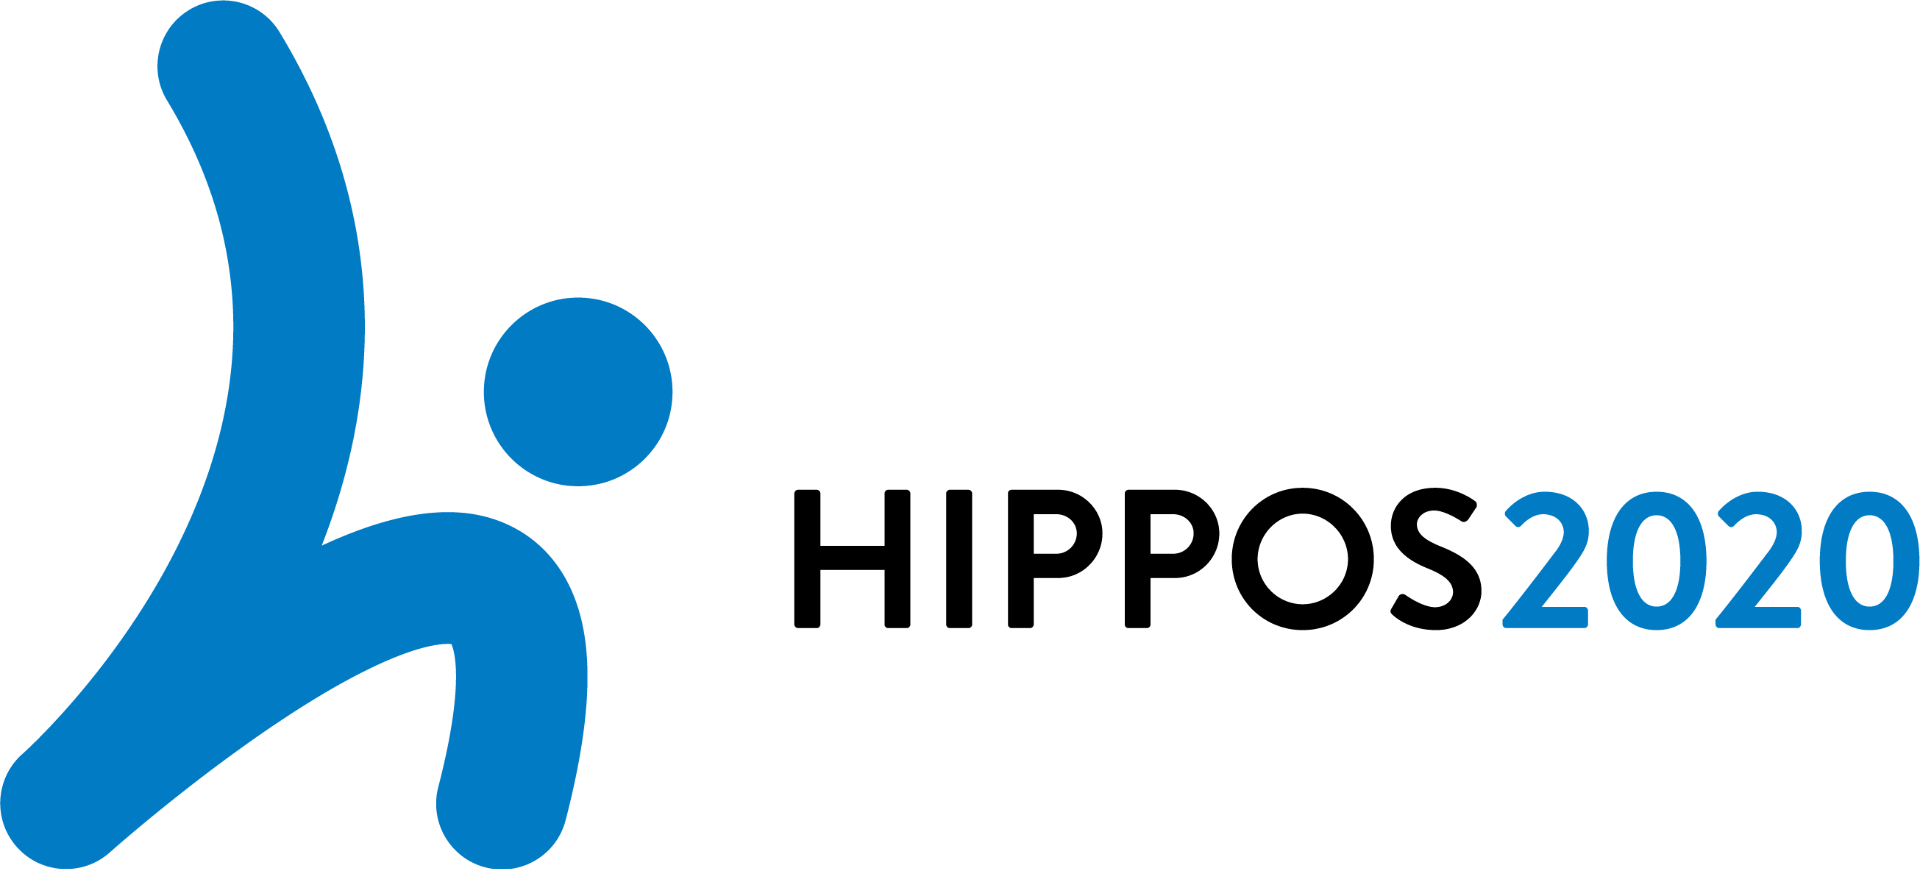 Hippo Sports Logo - Research and Education